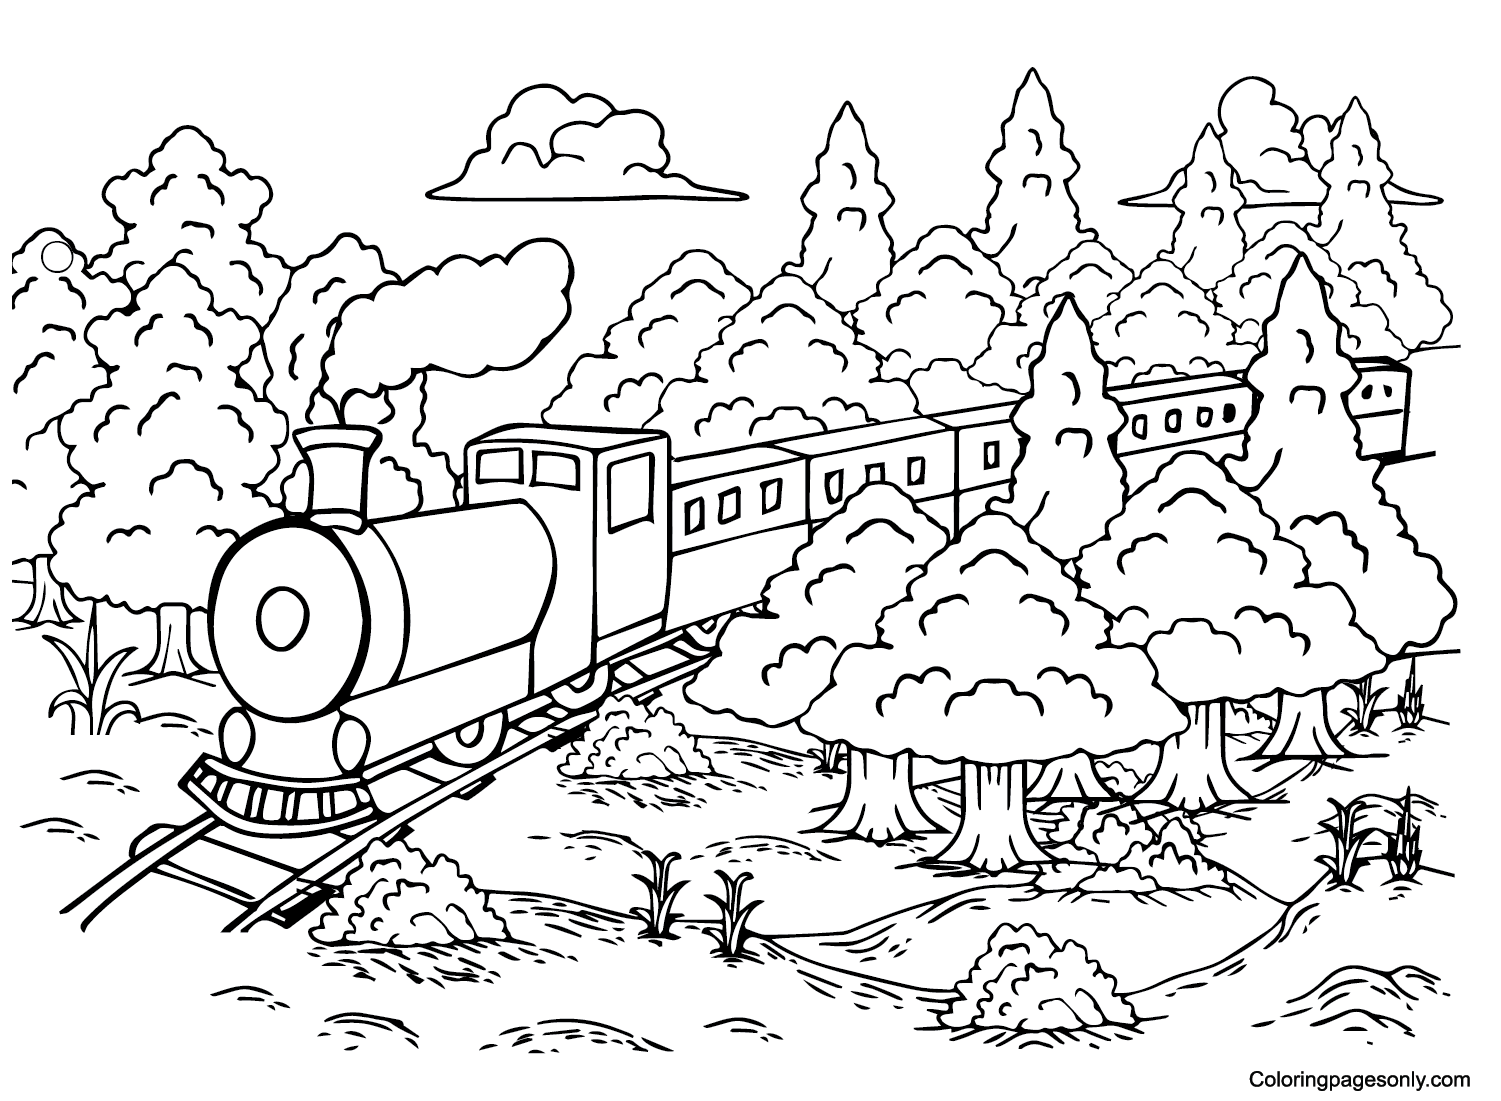 Polar express coloring pages printable for free download